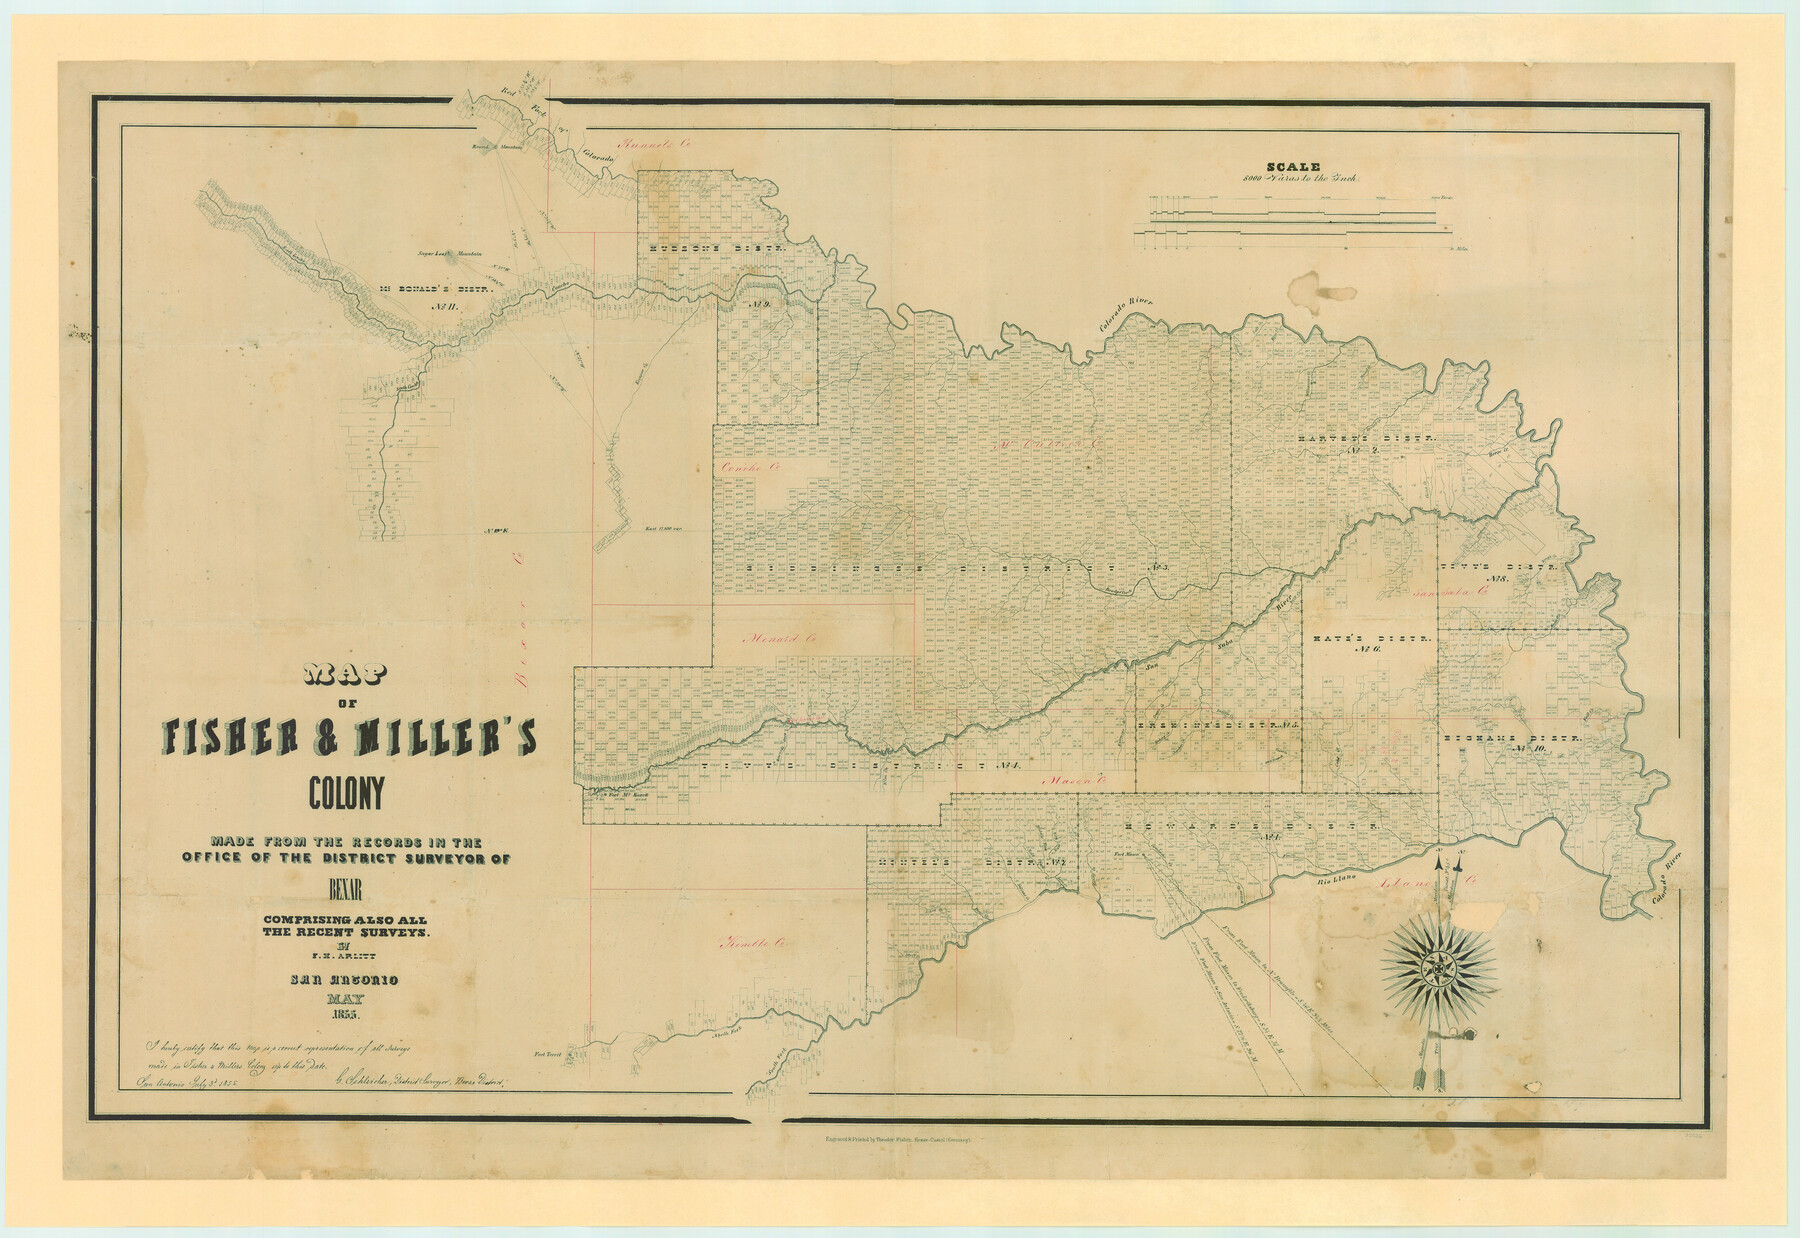 82026, Map of Fisher and Miller's Colony made from the records in the Office of the District Surveyor of Bexar comprising also all the recent surveys, General Map Collection